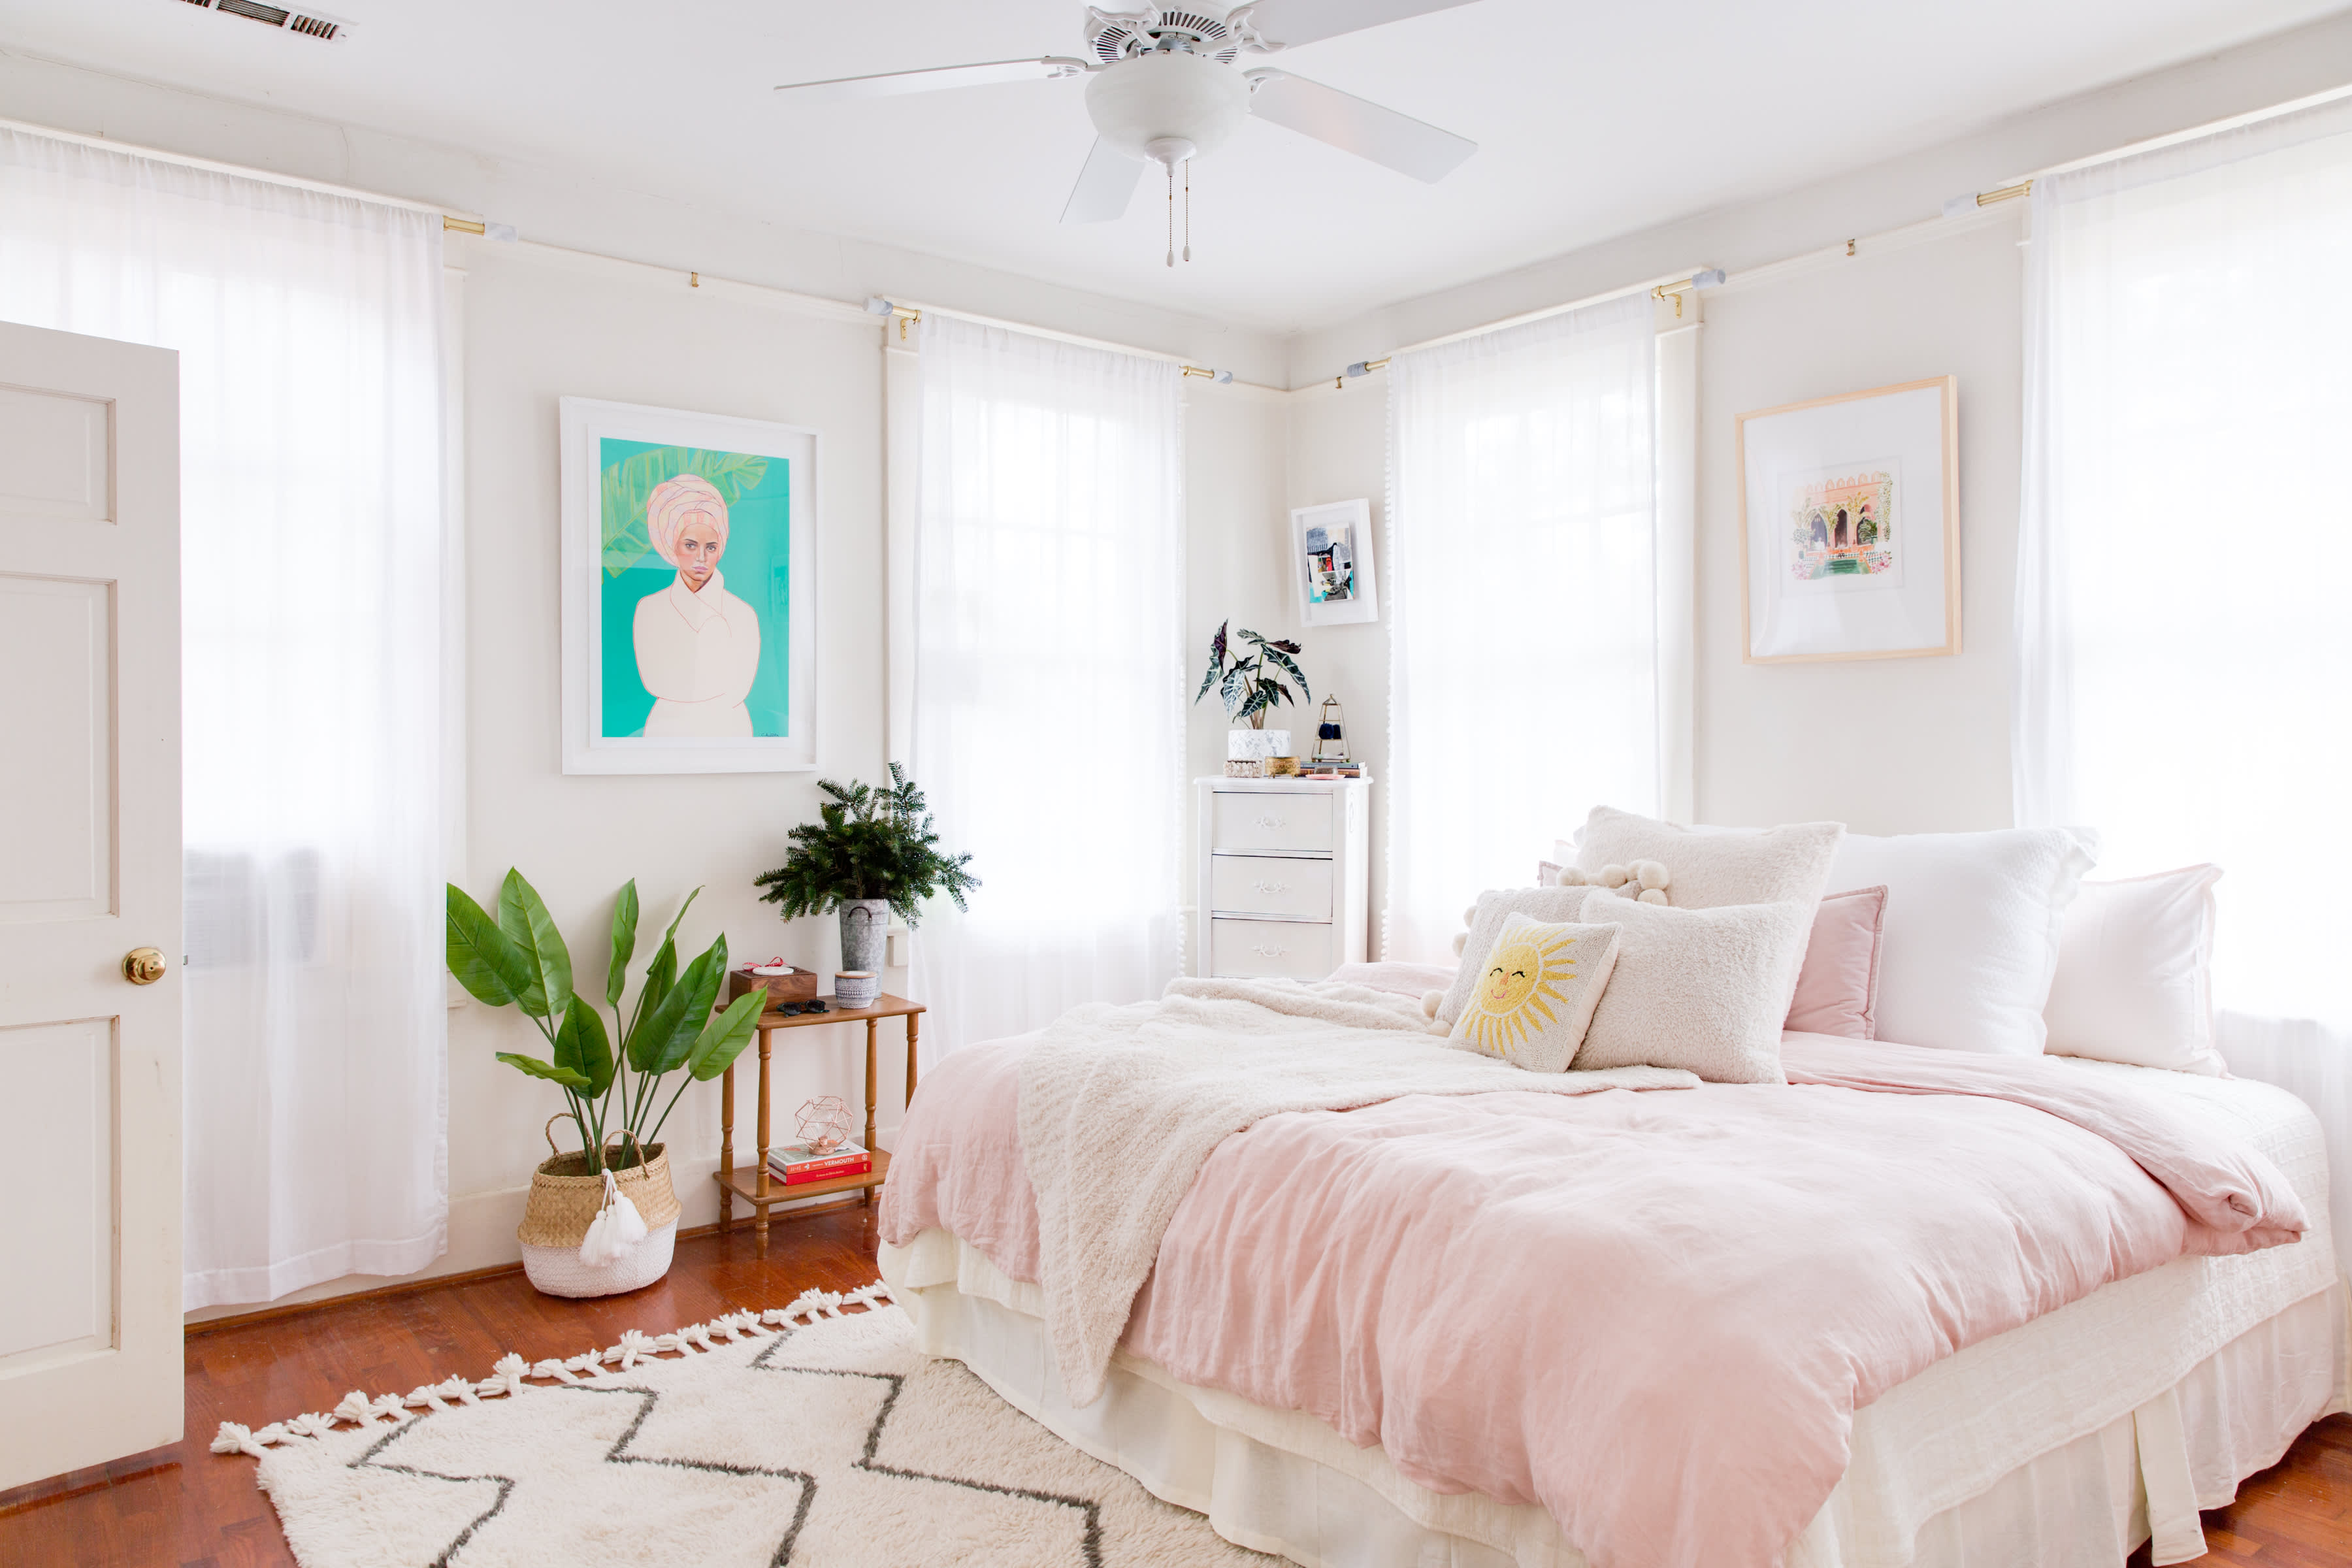 20 of the Best Pretty Rooms We're Loving Right Now